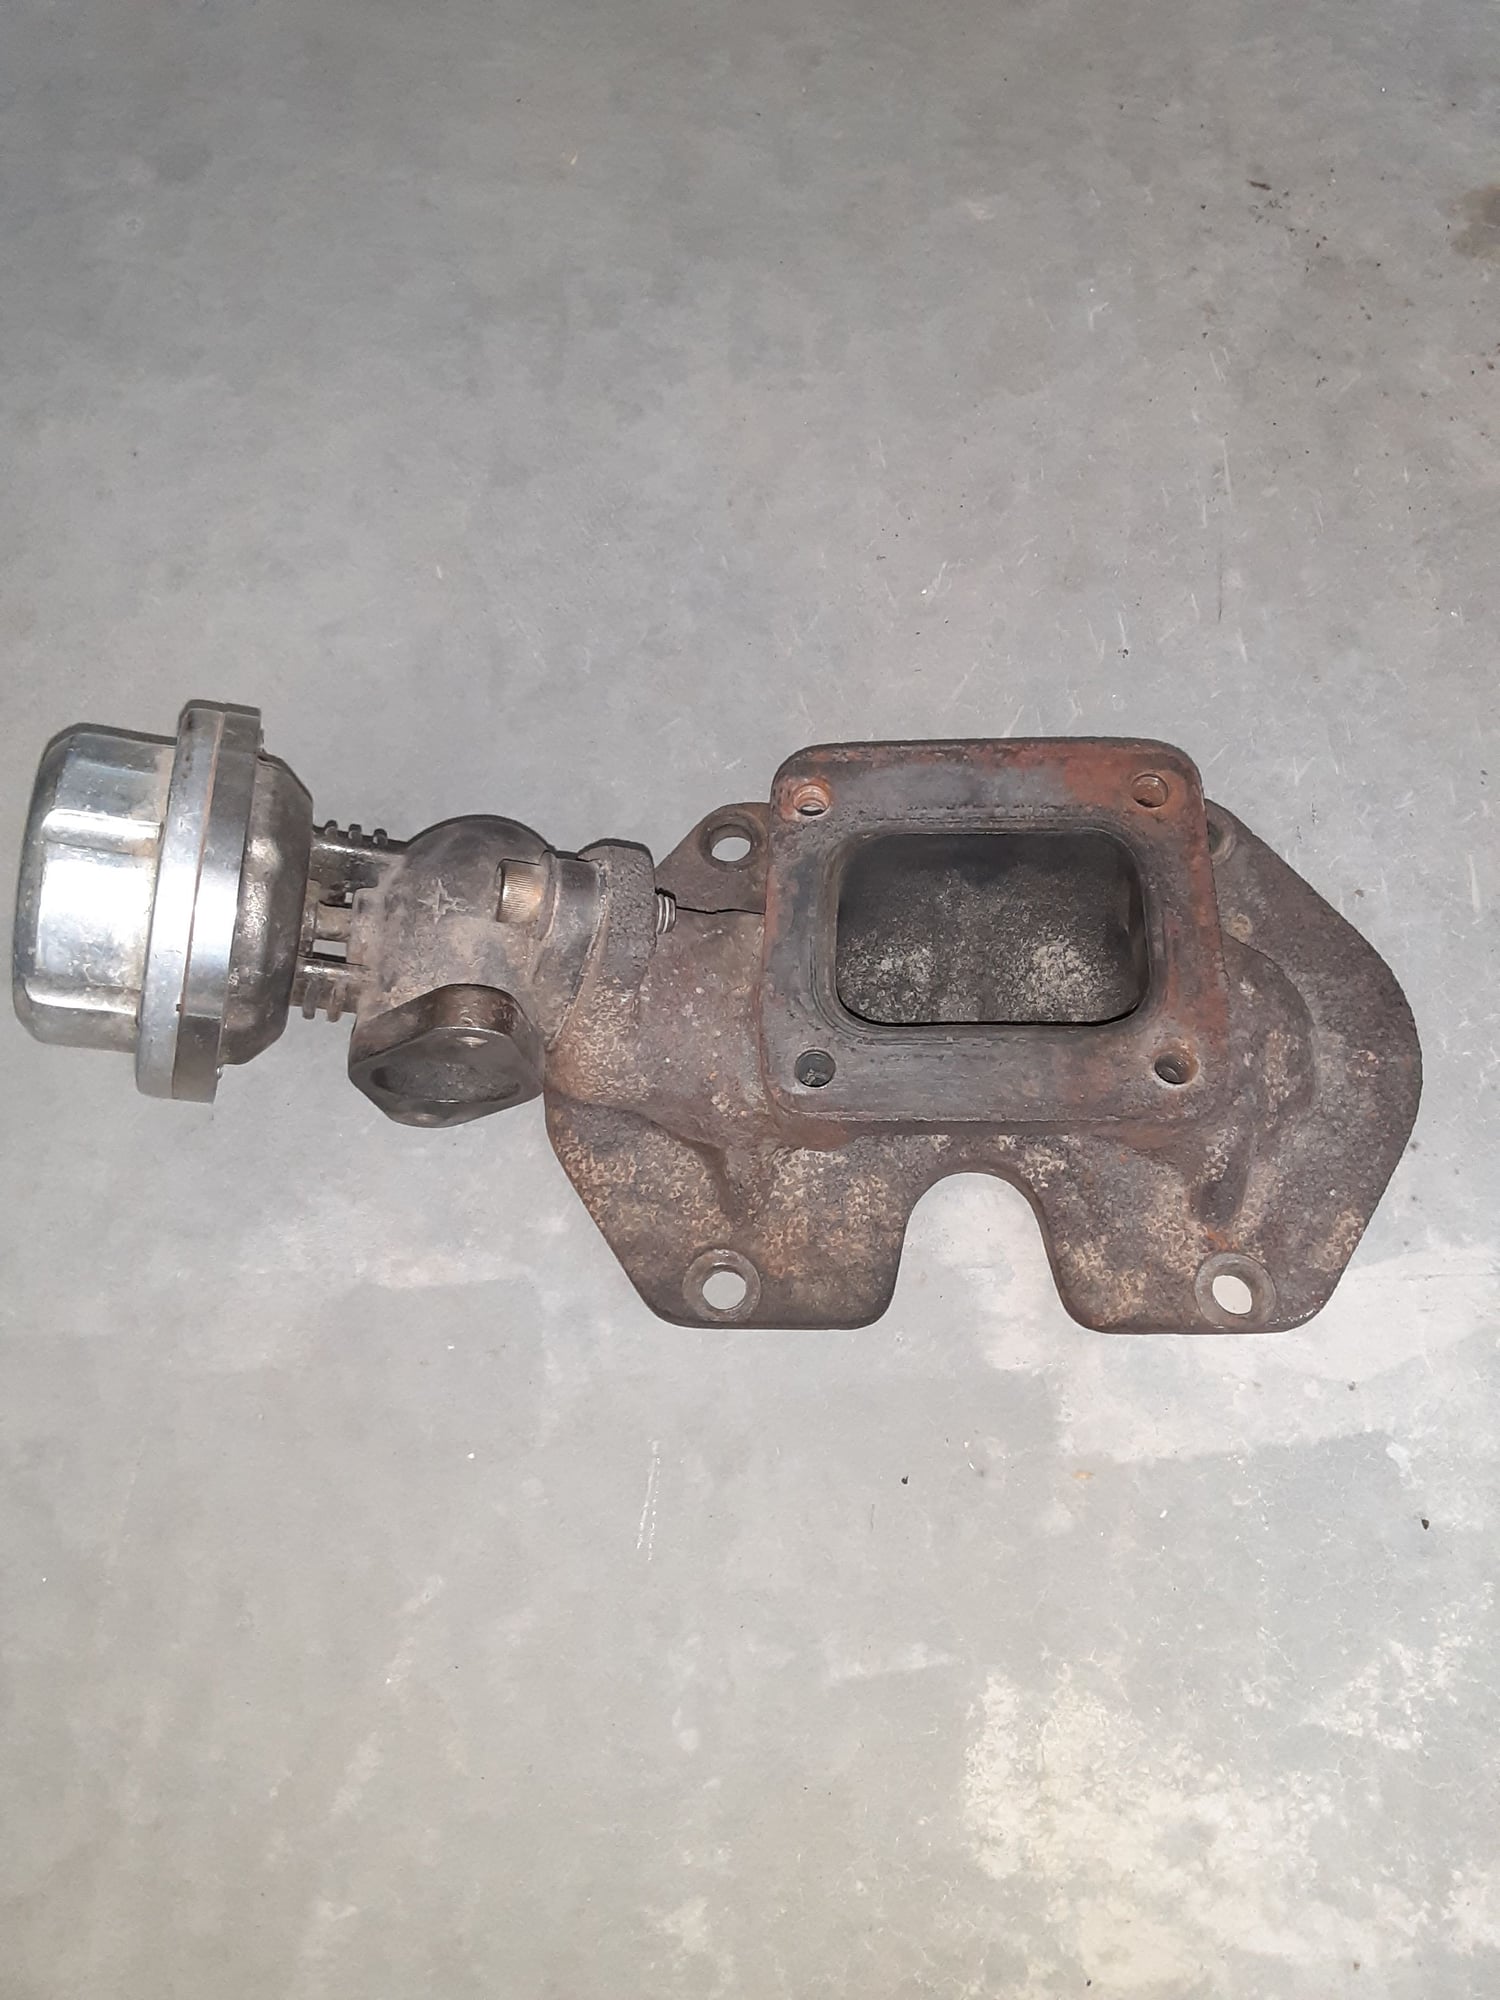 1979 Mazda RX-7 - Cartech exhaust manifold, turbonetics T4 exhaust housing - Engine - Exhaust - $225 - Montrose, CO 81401, United States